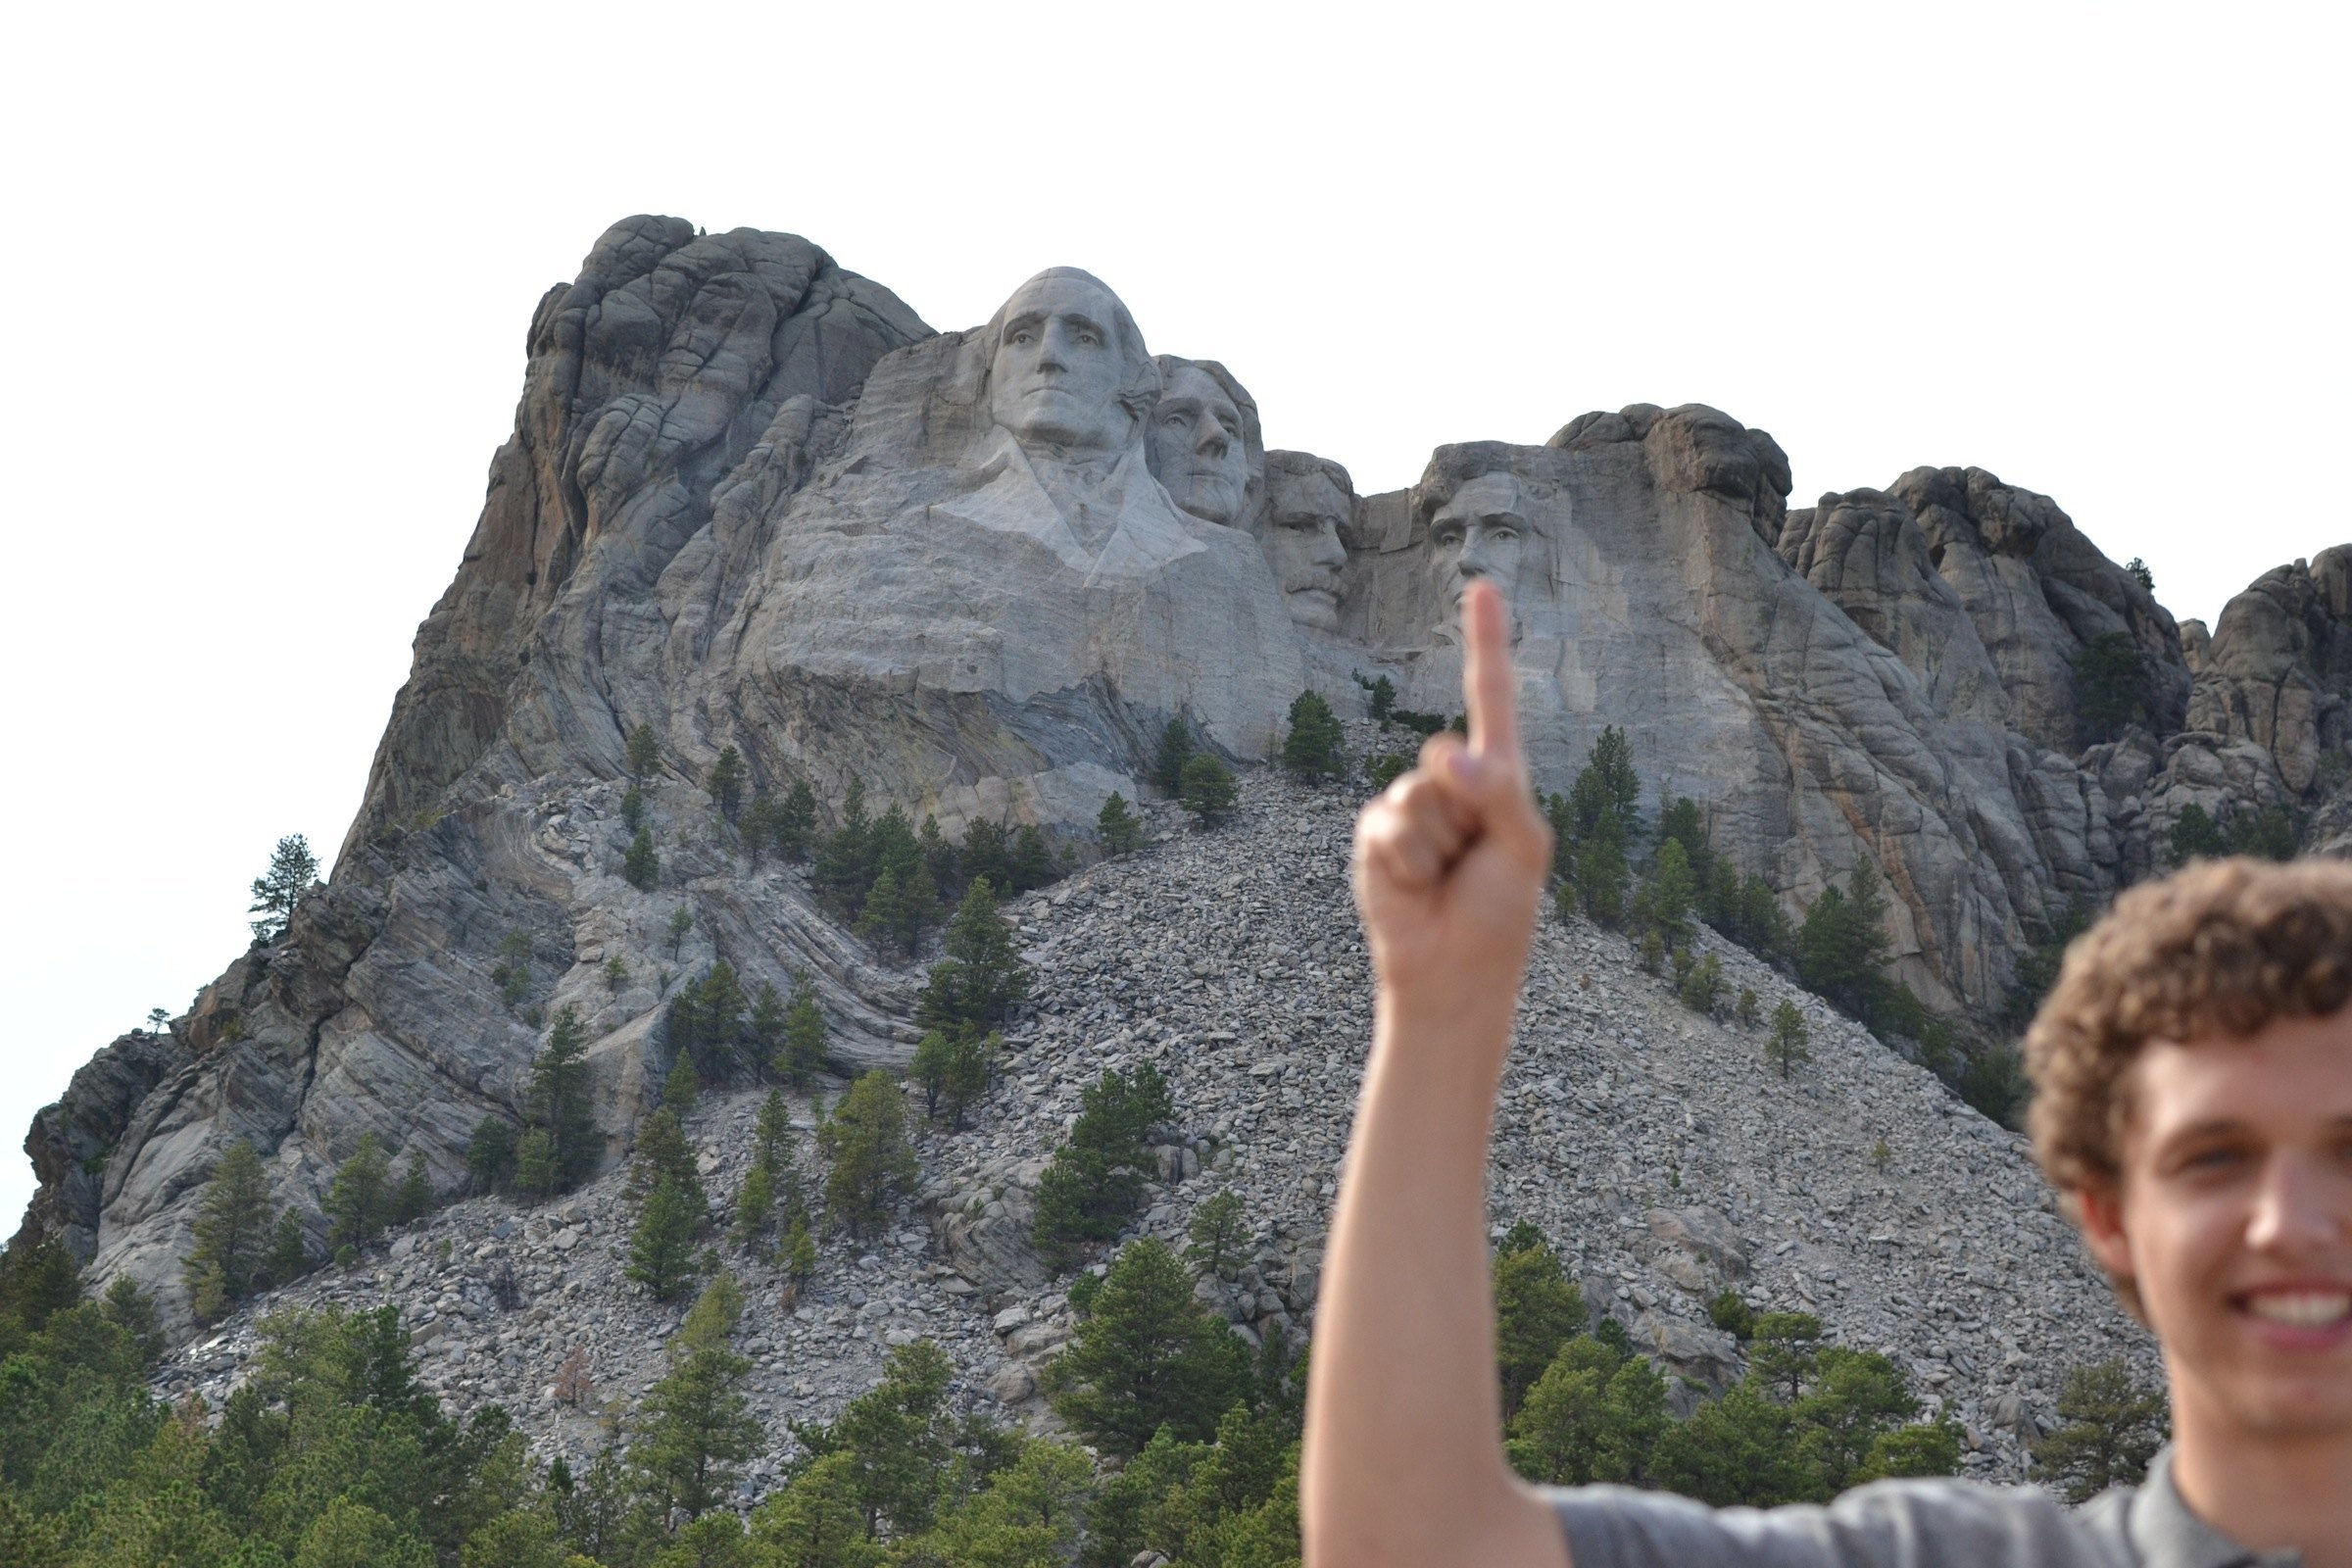 Attempt at picking Mr Lincoln's nose